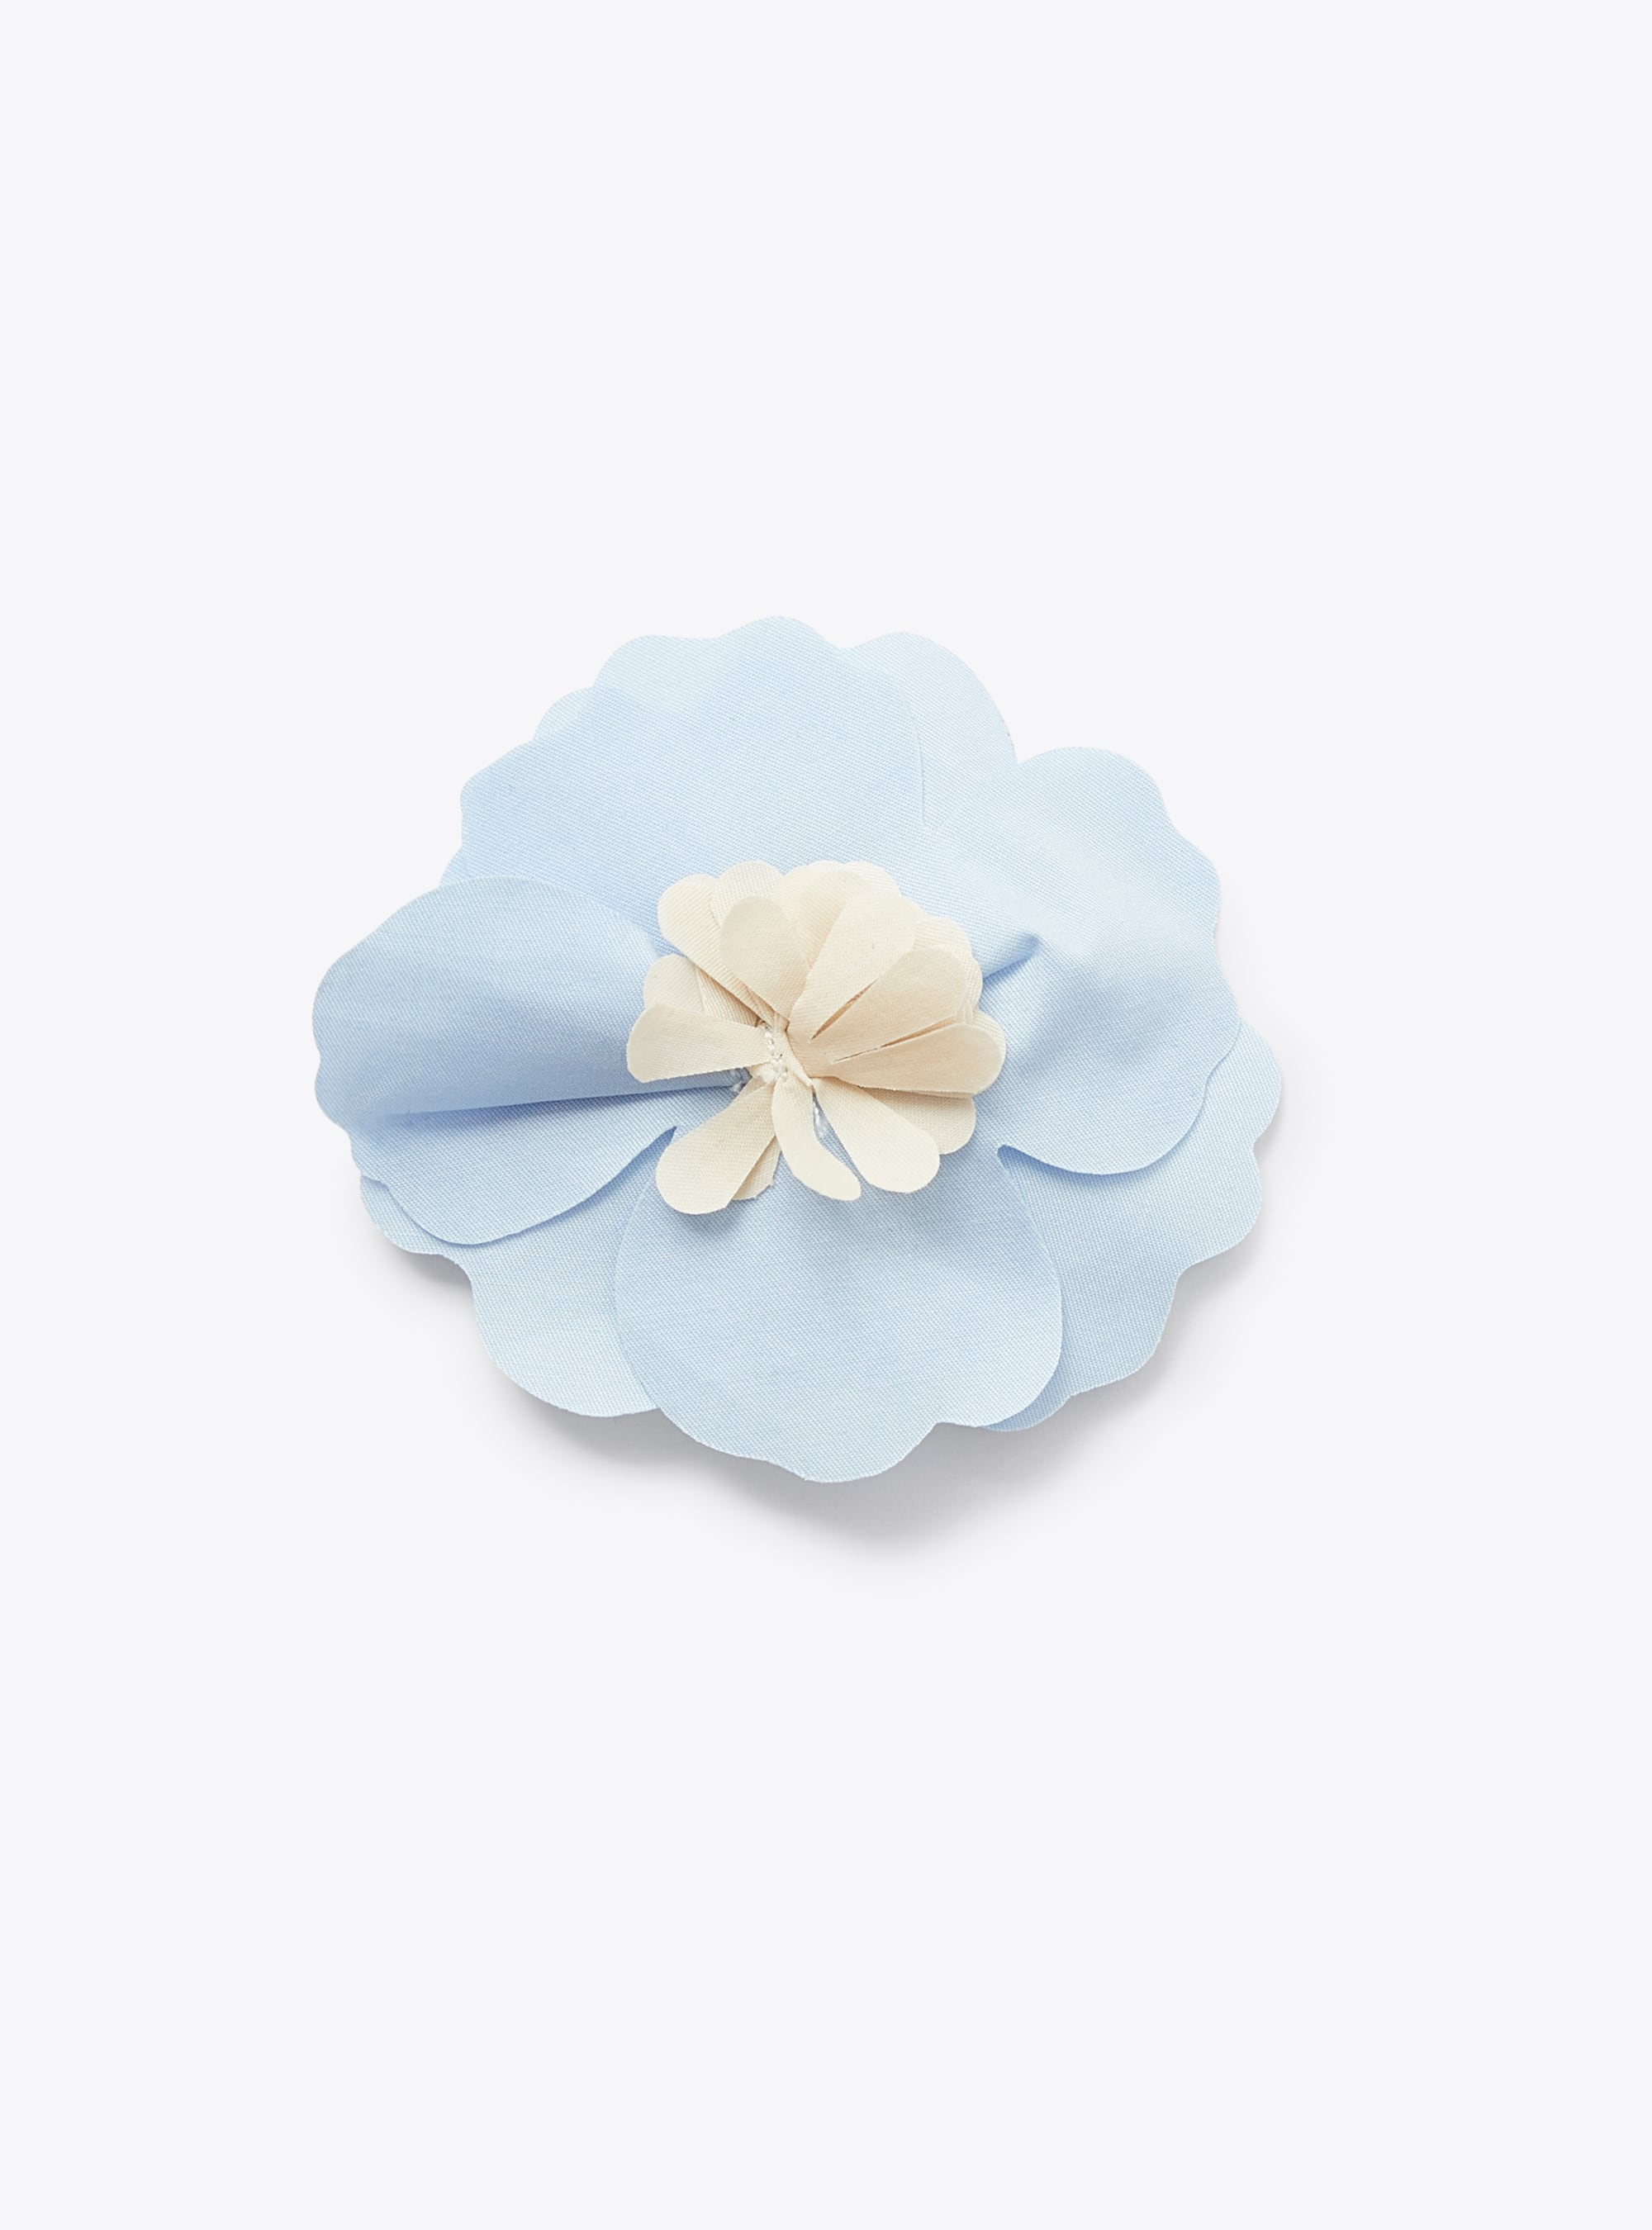 Hair clip with light-blue flower embellishment - Accessories - Il Gufo